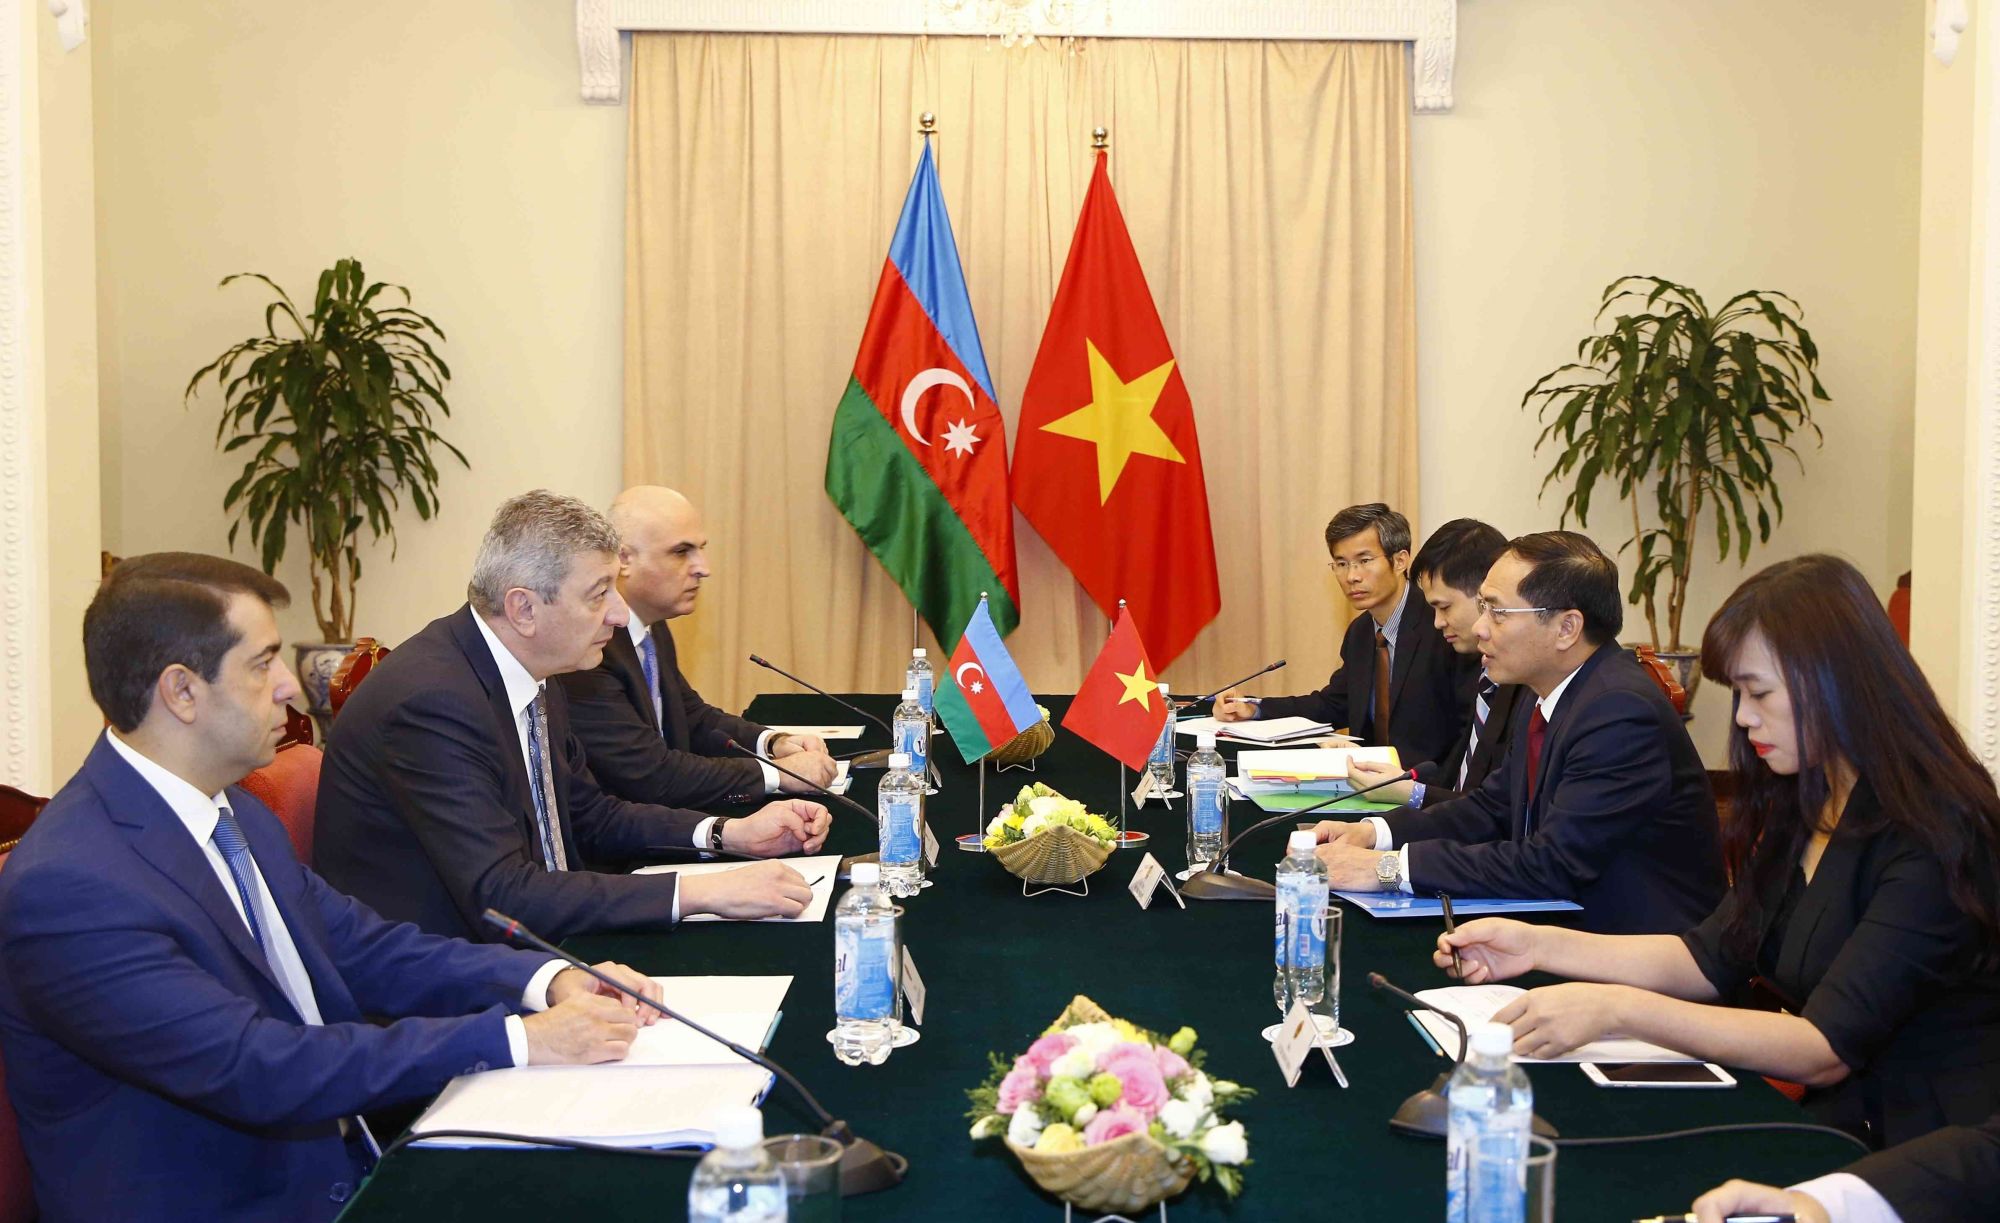 Vietnamese Deputy Minister of Foreign Affairs Bui Thanh Son and his Azerbaijani counterpart Ramiz Ayvaz oglu Hasanov at the consultation on March 12, 2019 (Source: VNA)